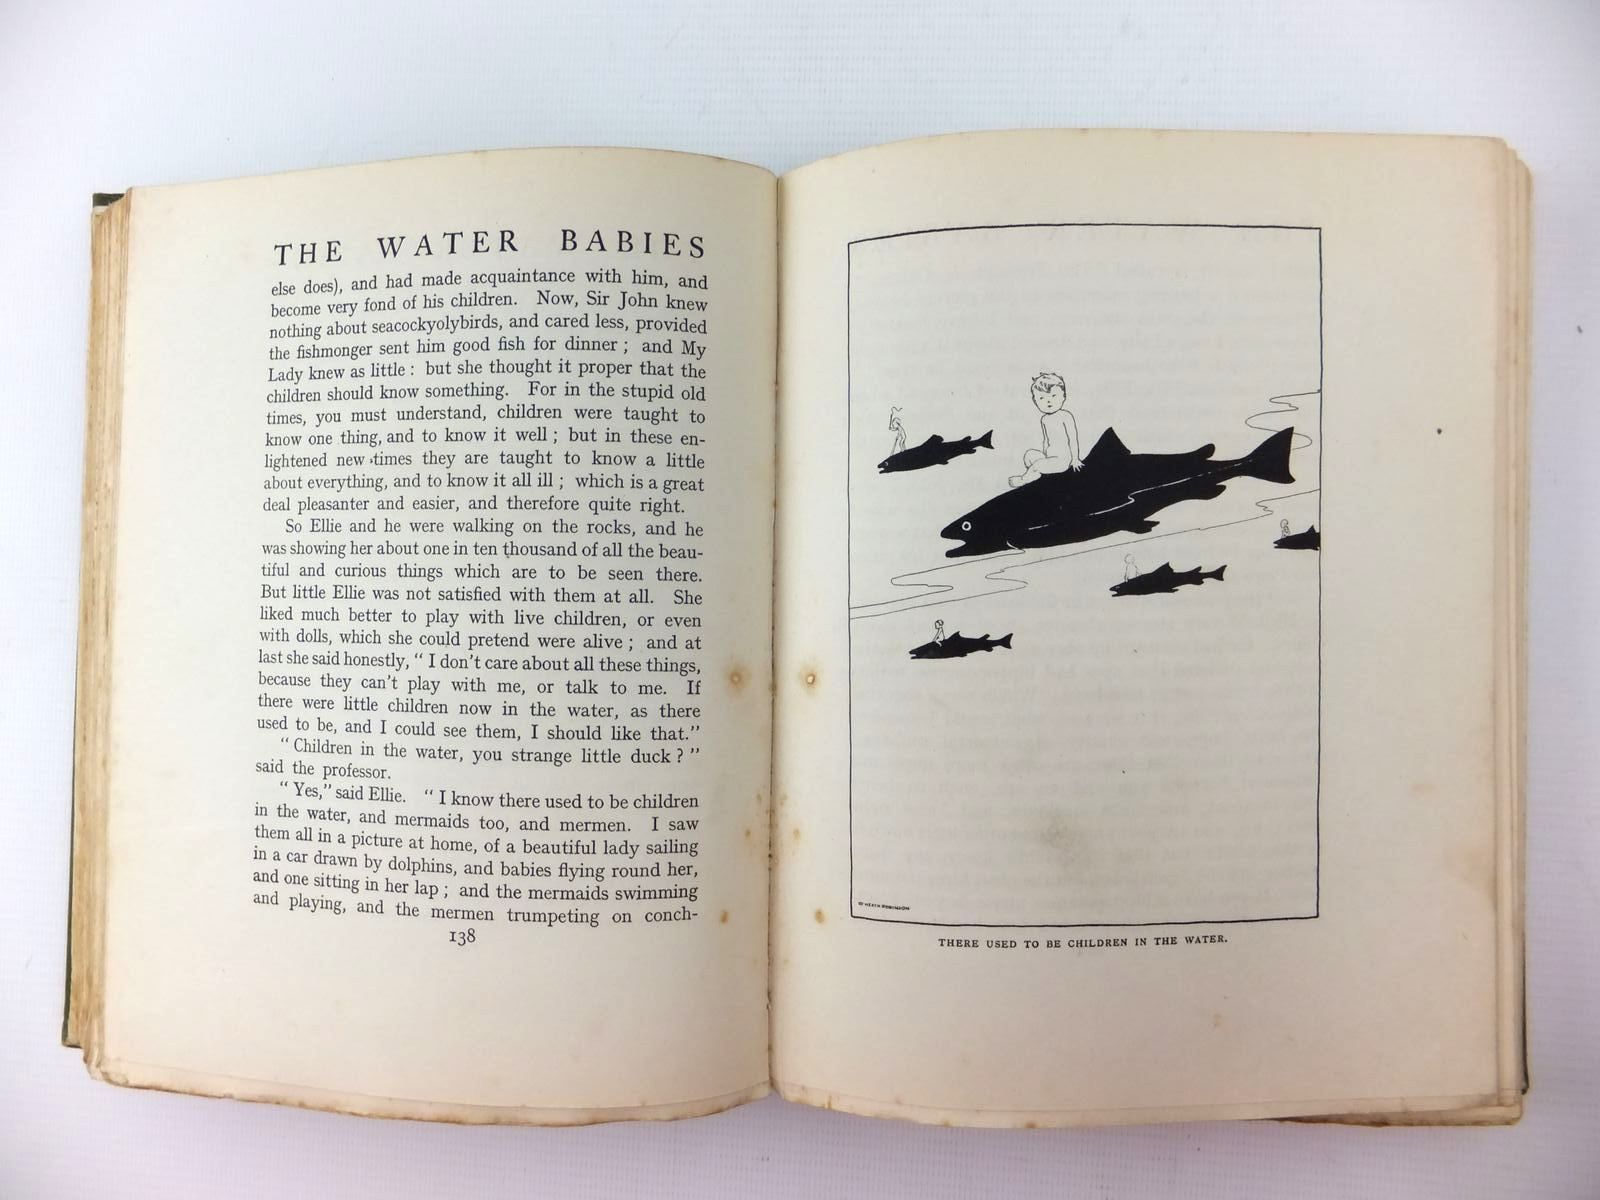 Photo of THE WATER-BABIES written by Kingsley, Charles illustrated by Robinson, W. Heath published by Constable & Co. Ltd. (STOCK CODE: 1208804)  for sale by Stella & Rose's Books